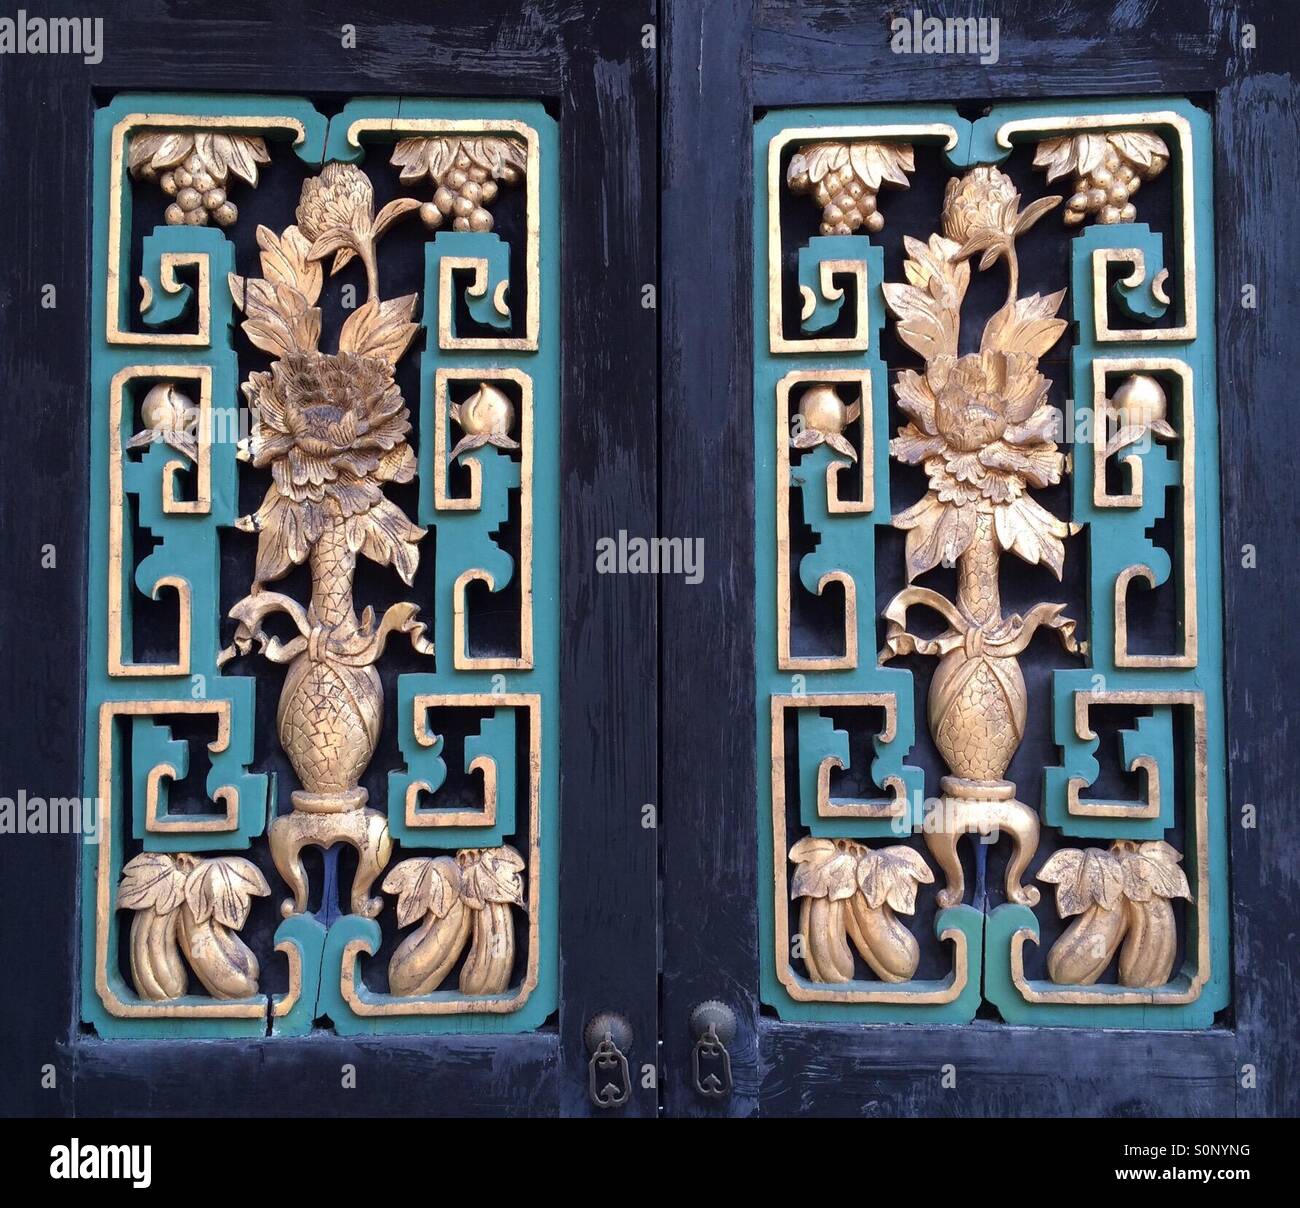 Chinese wood carving windows Stock Photo